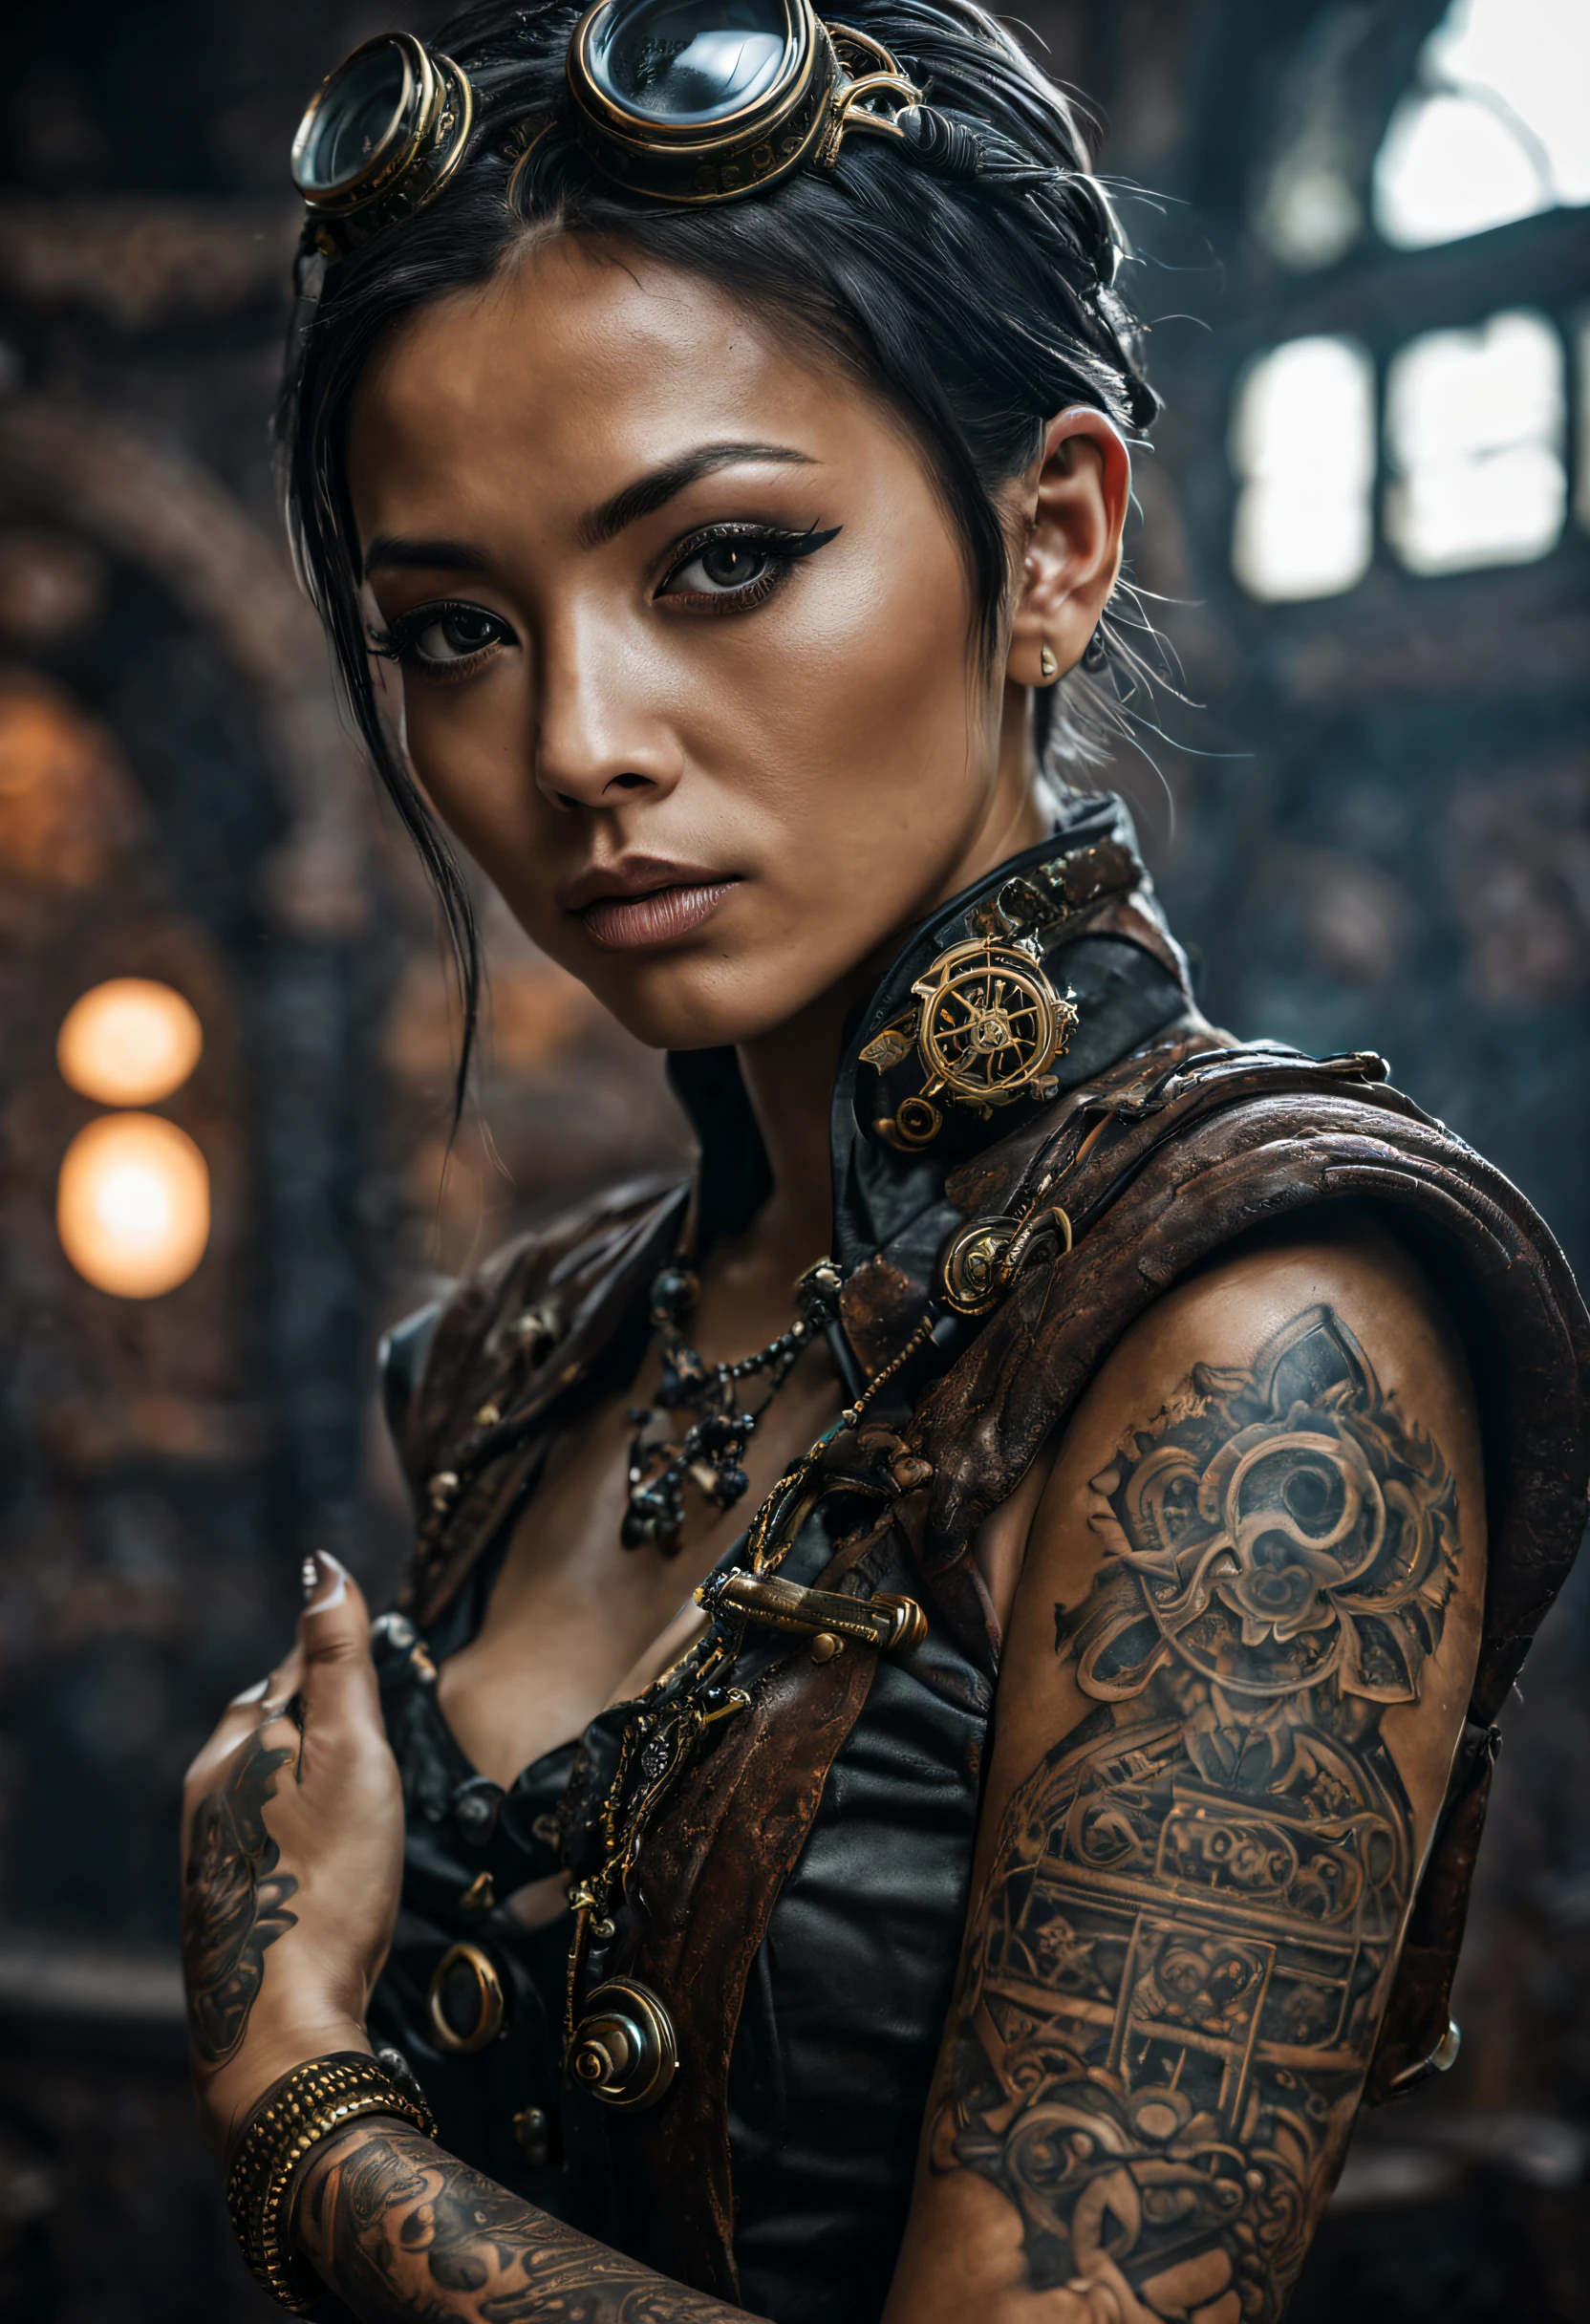 A stunning photograph of a female Buddhist monk in a meticulously designed steampunk setting. Tattoo. Her eyes and the detailed environment create an engaging image. The sharp focus ensures that every aspect of her face, skin, and body is highly detailed. This artwork has the potential to trend on ArtStation. (Photographed with a high-end DSLR camera, f/2.8, 1/200s, ISO 400)